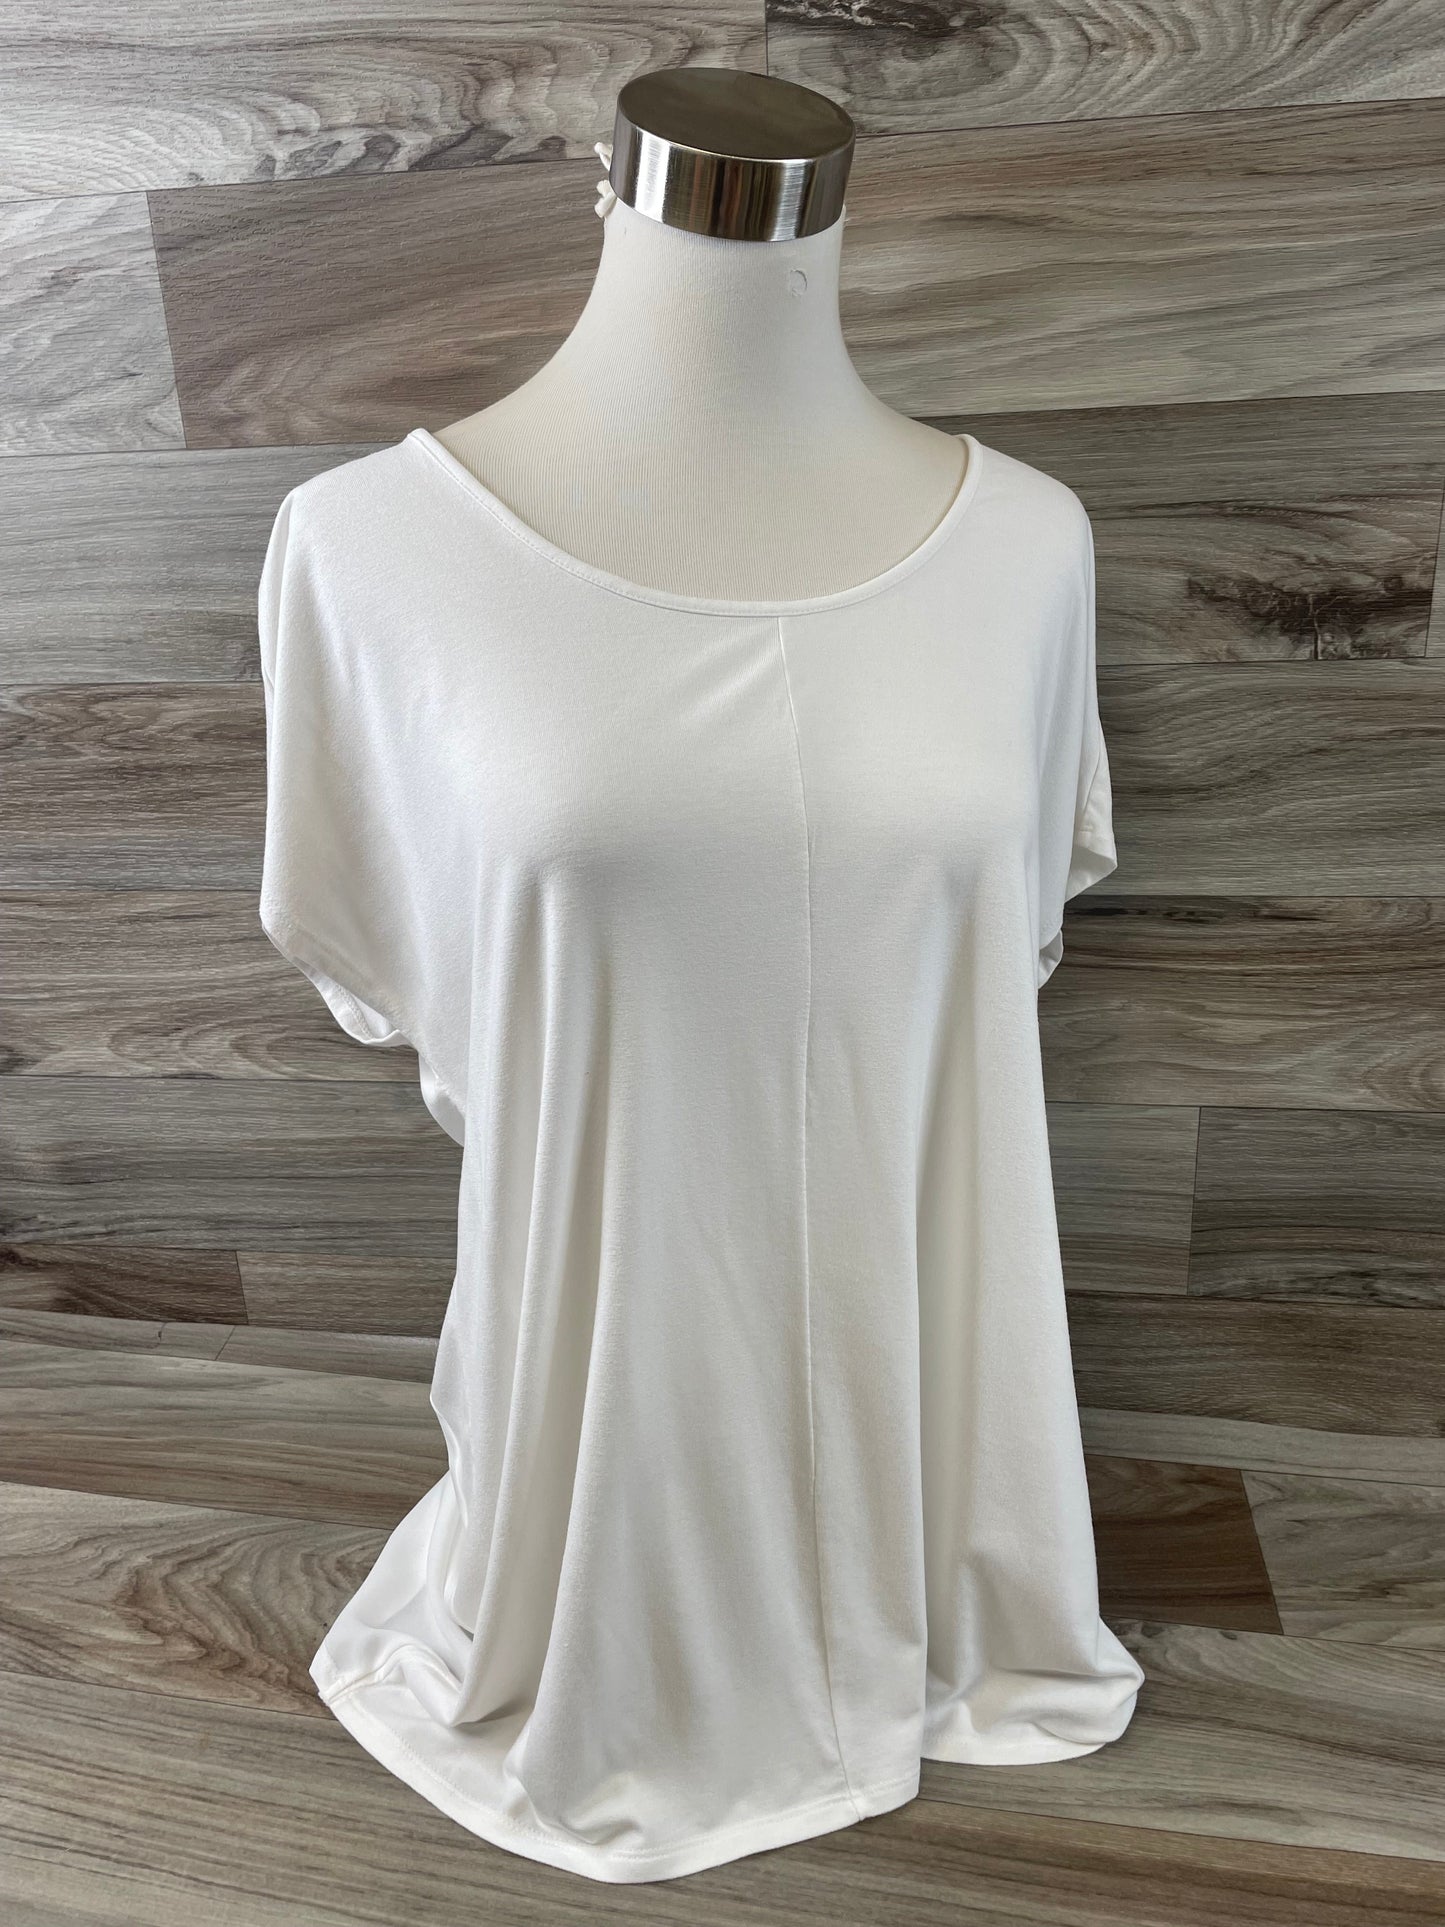 White Top Short Sleeve Basic Chicos, Size L